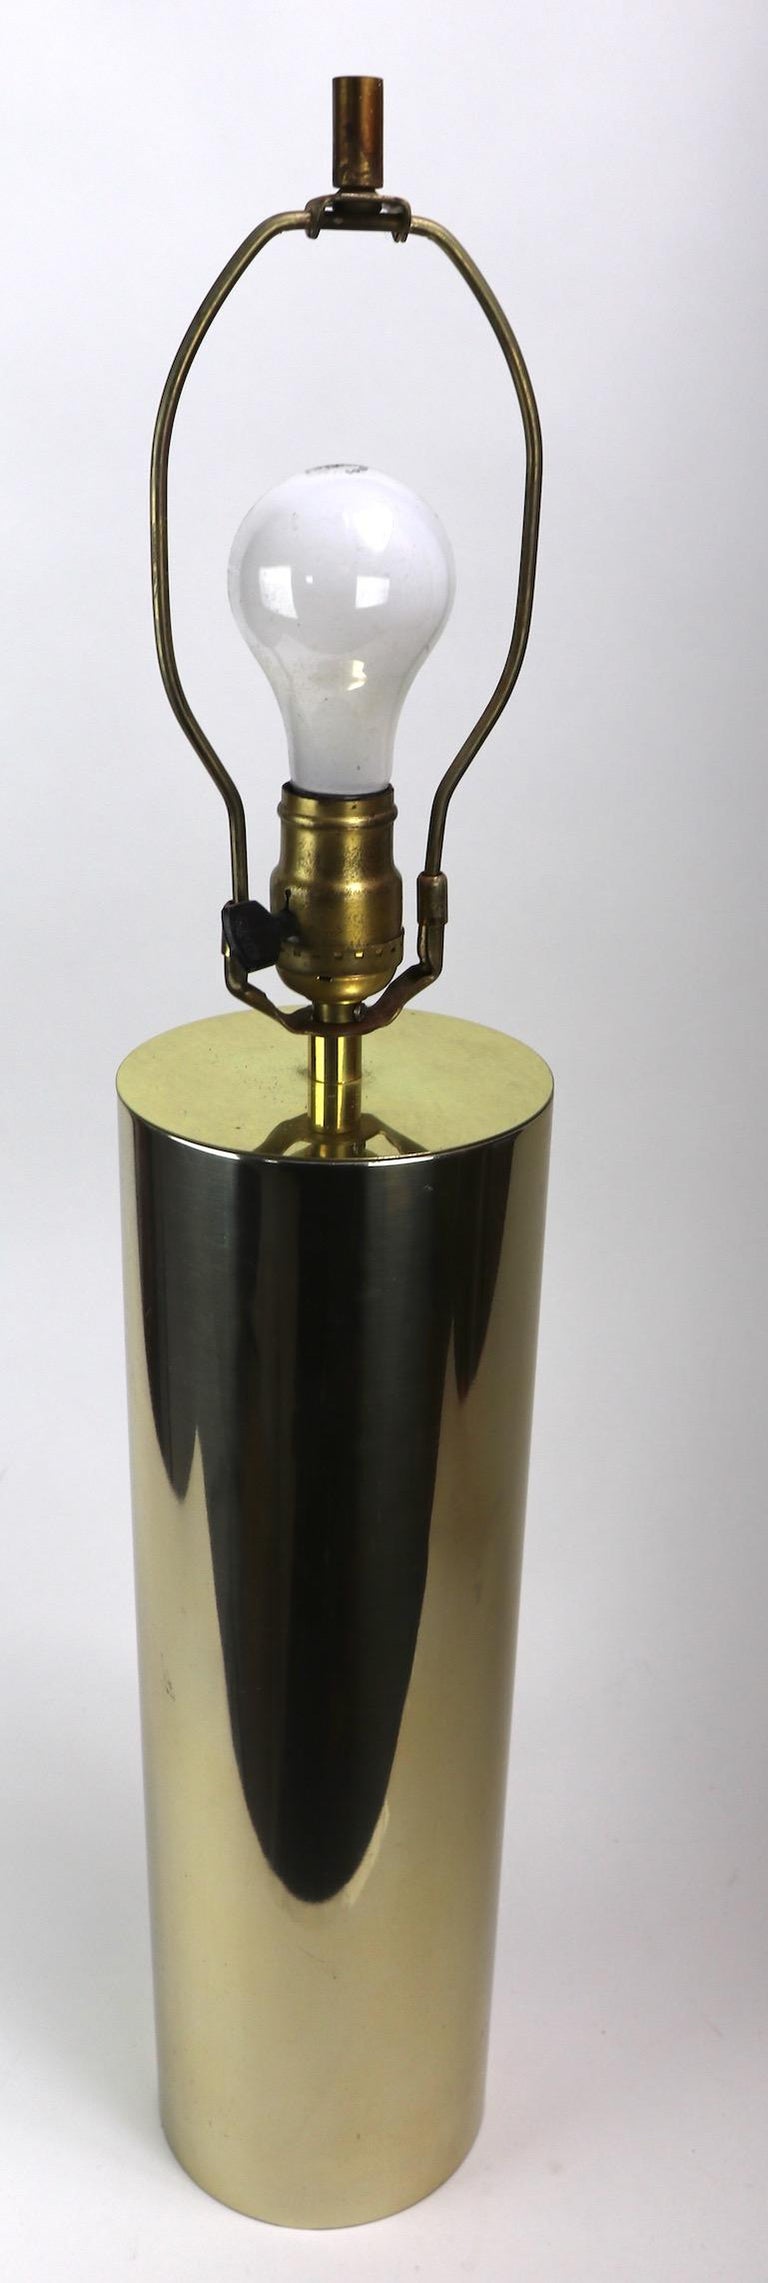 Minimalist Brass Tone Cylinder Form Table Lamp For Sale at 1stdibs